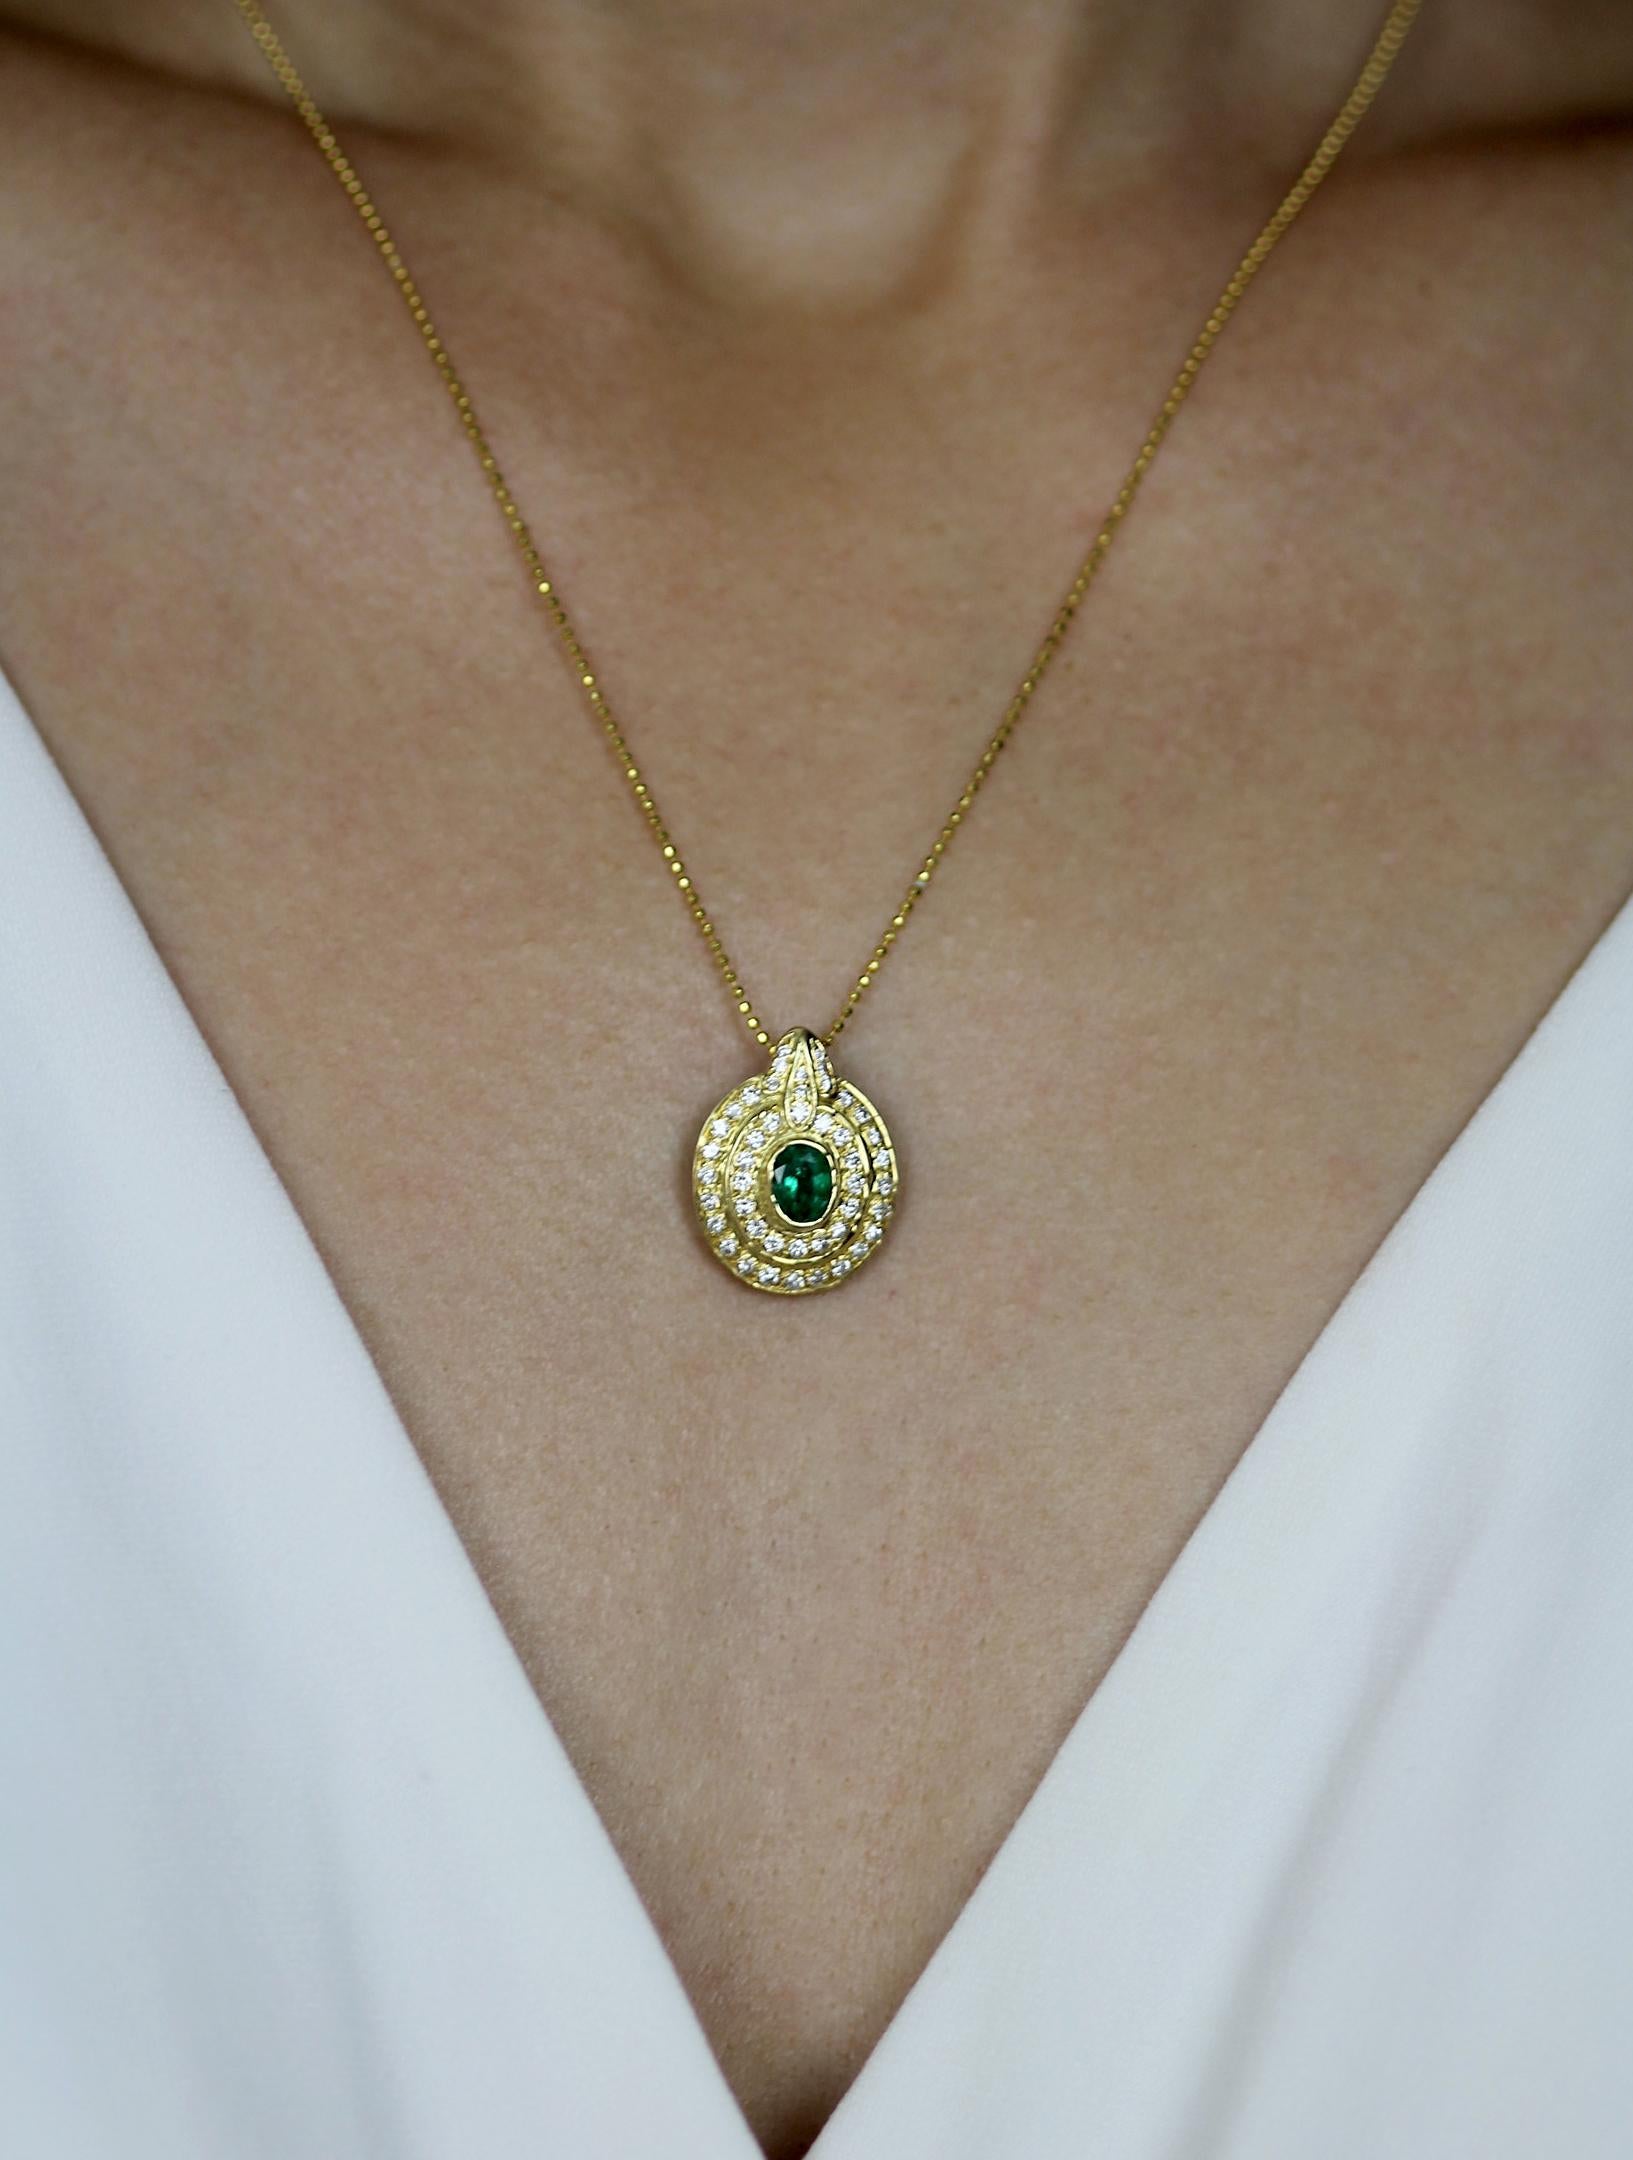 A stunningly unconventional yellow gold and emerald pendant reminiscent of an exotic tortoise motif. The  central wildlife-green oval emerald is encircled by two accented diamond encrusted borders, which both contrast with and compliment the deep